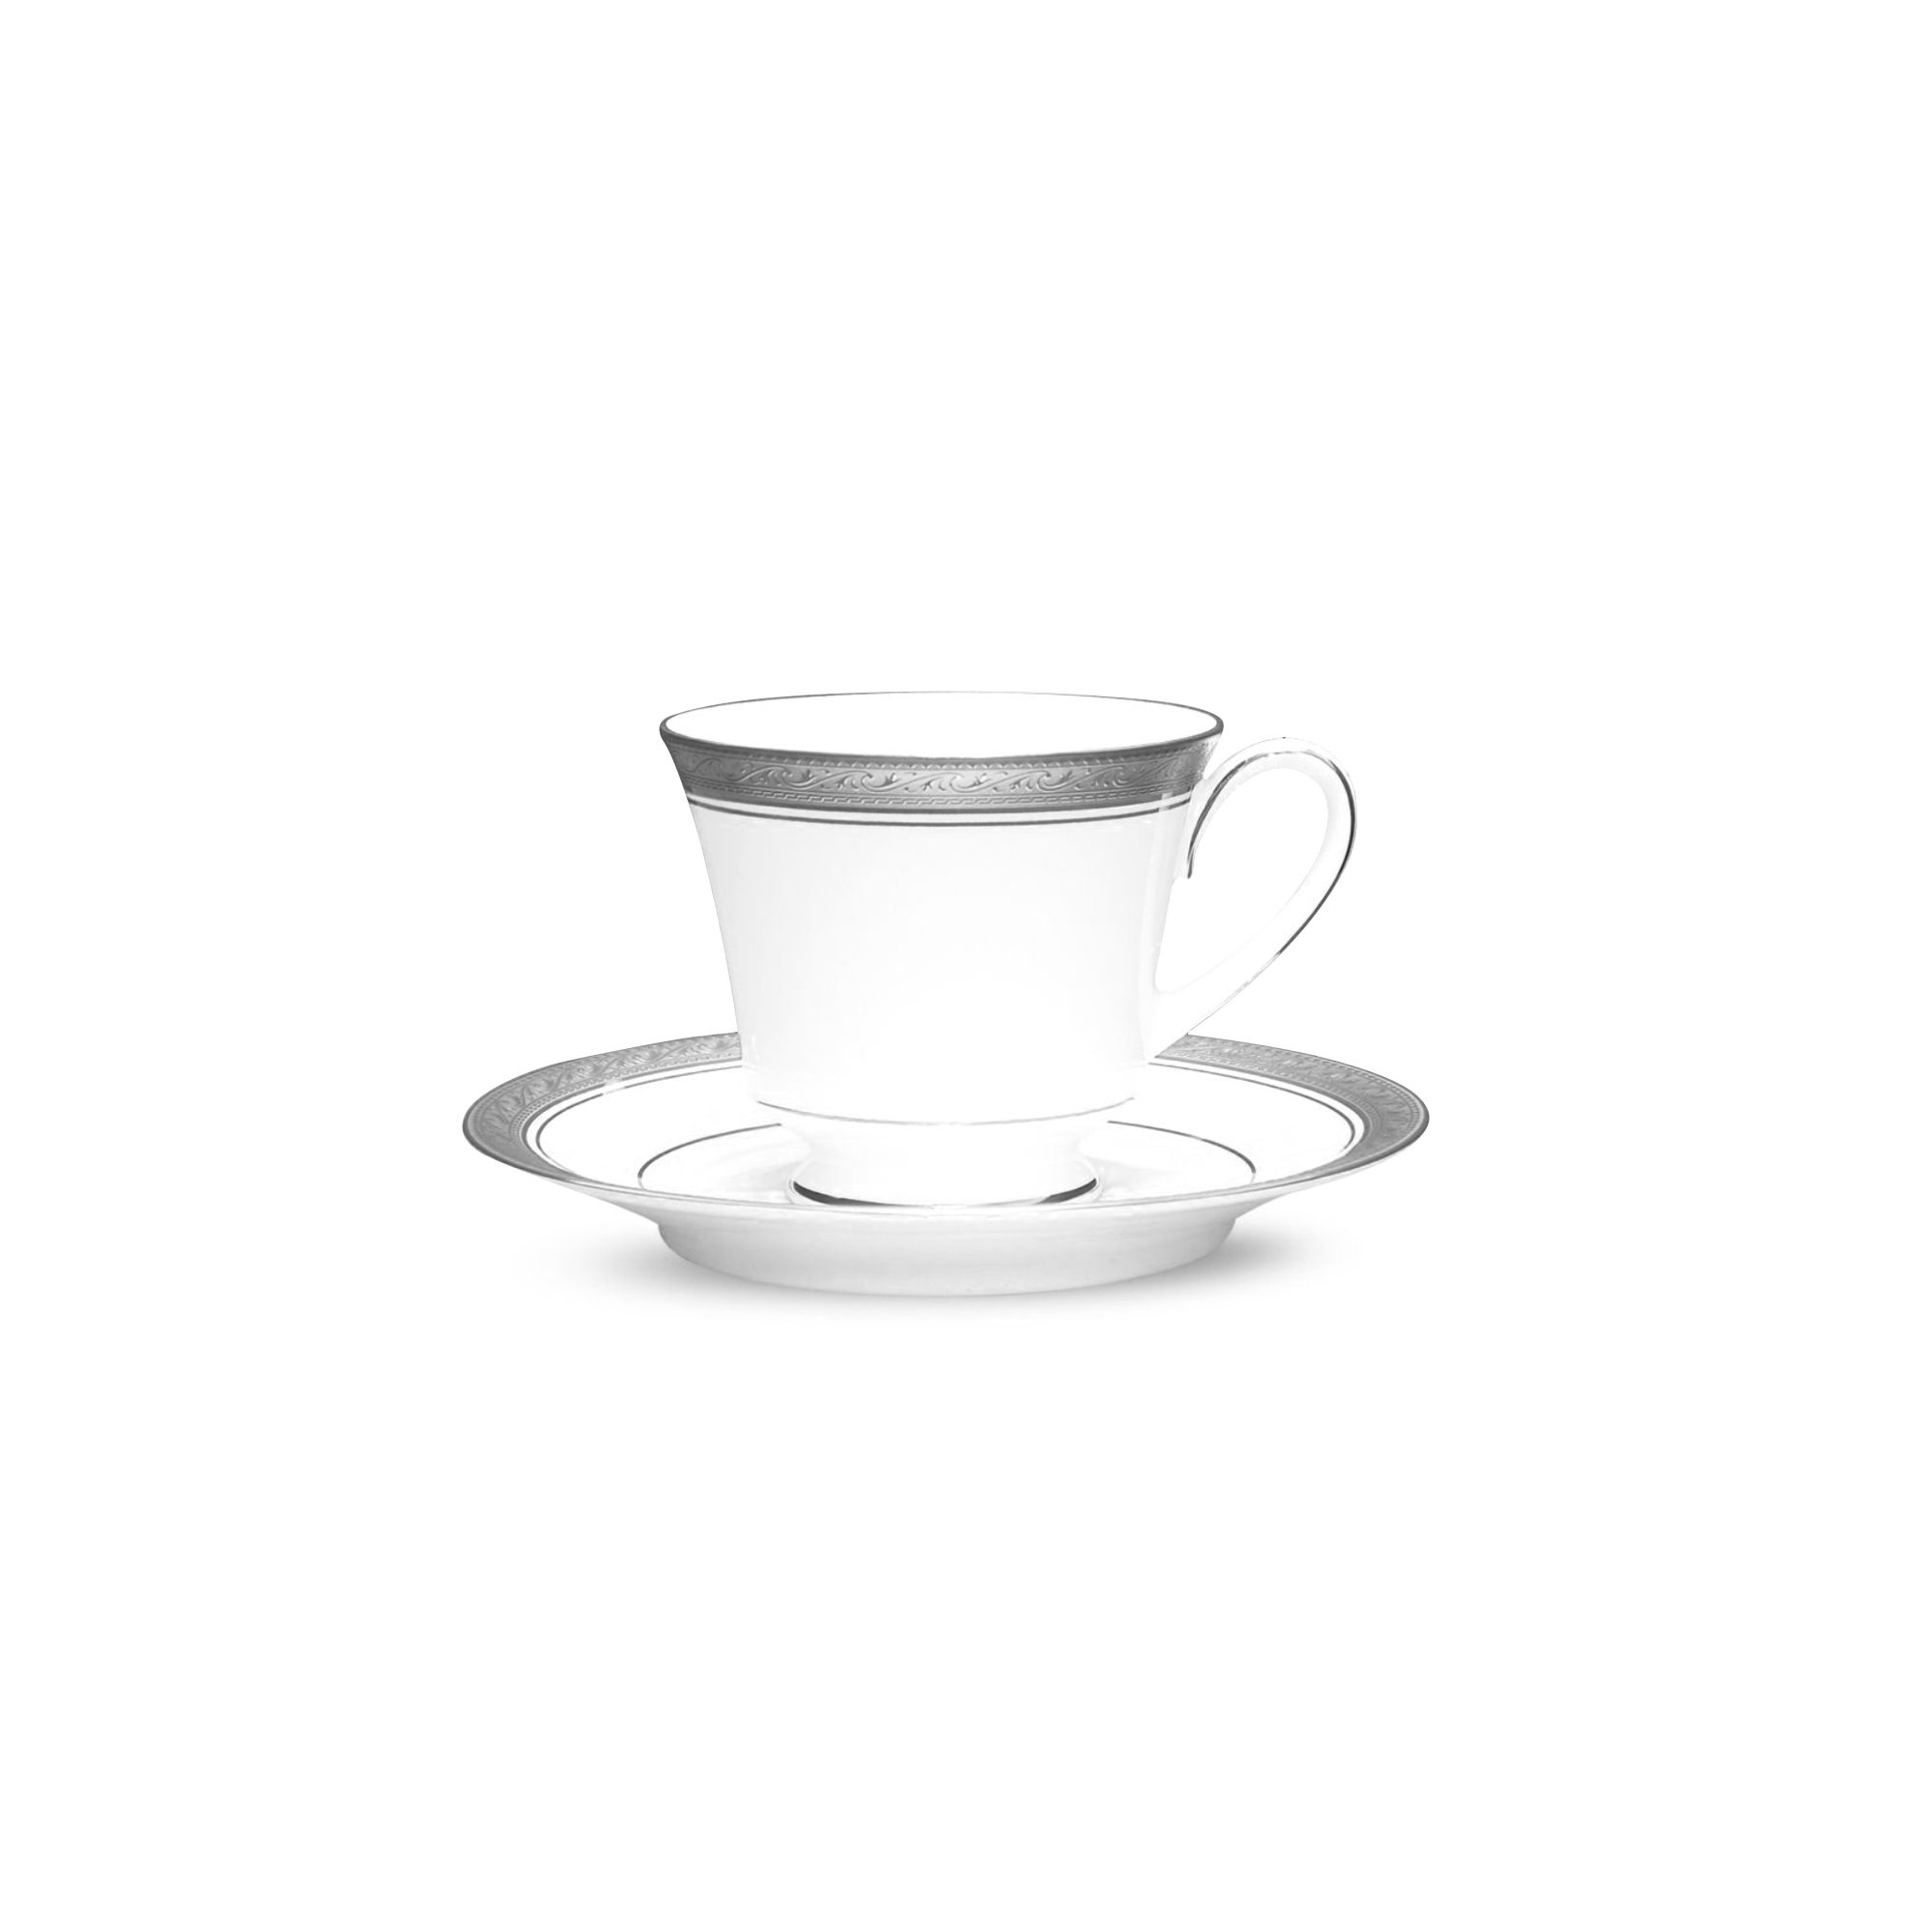 Picture of Noritake 13Pcs Cup and Saucer with Dinner Plate - Crestwood Platinum